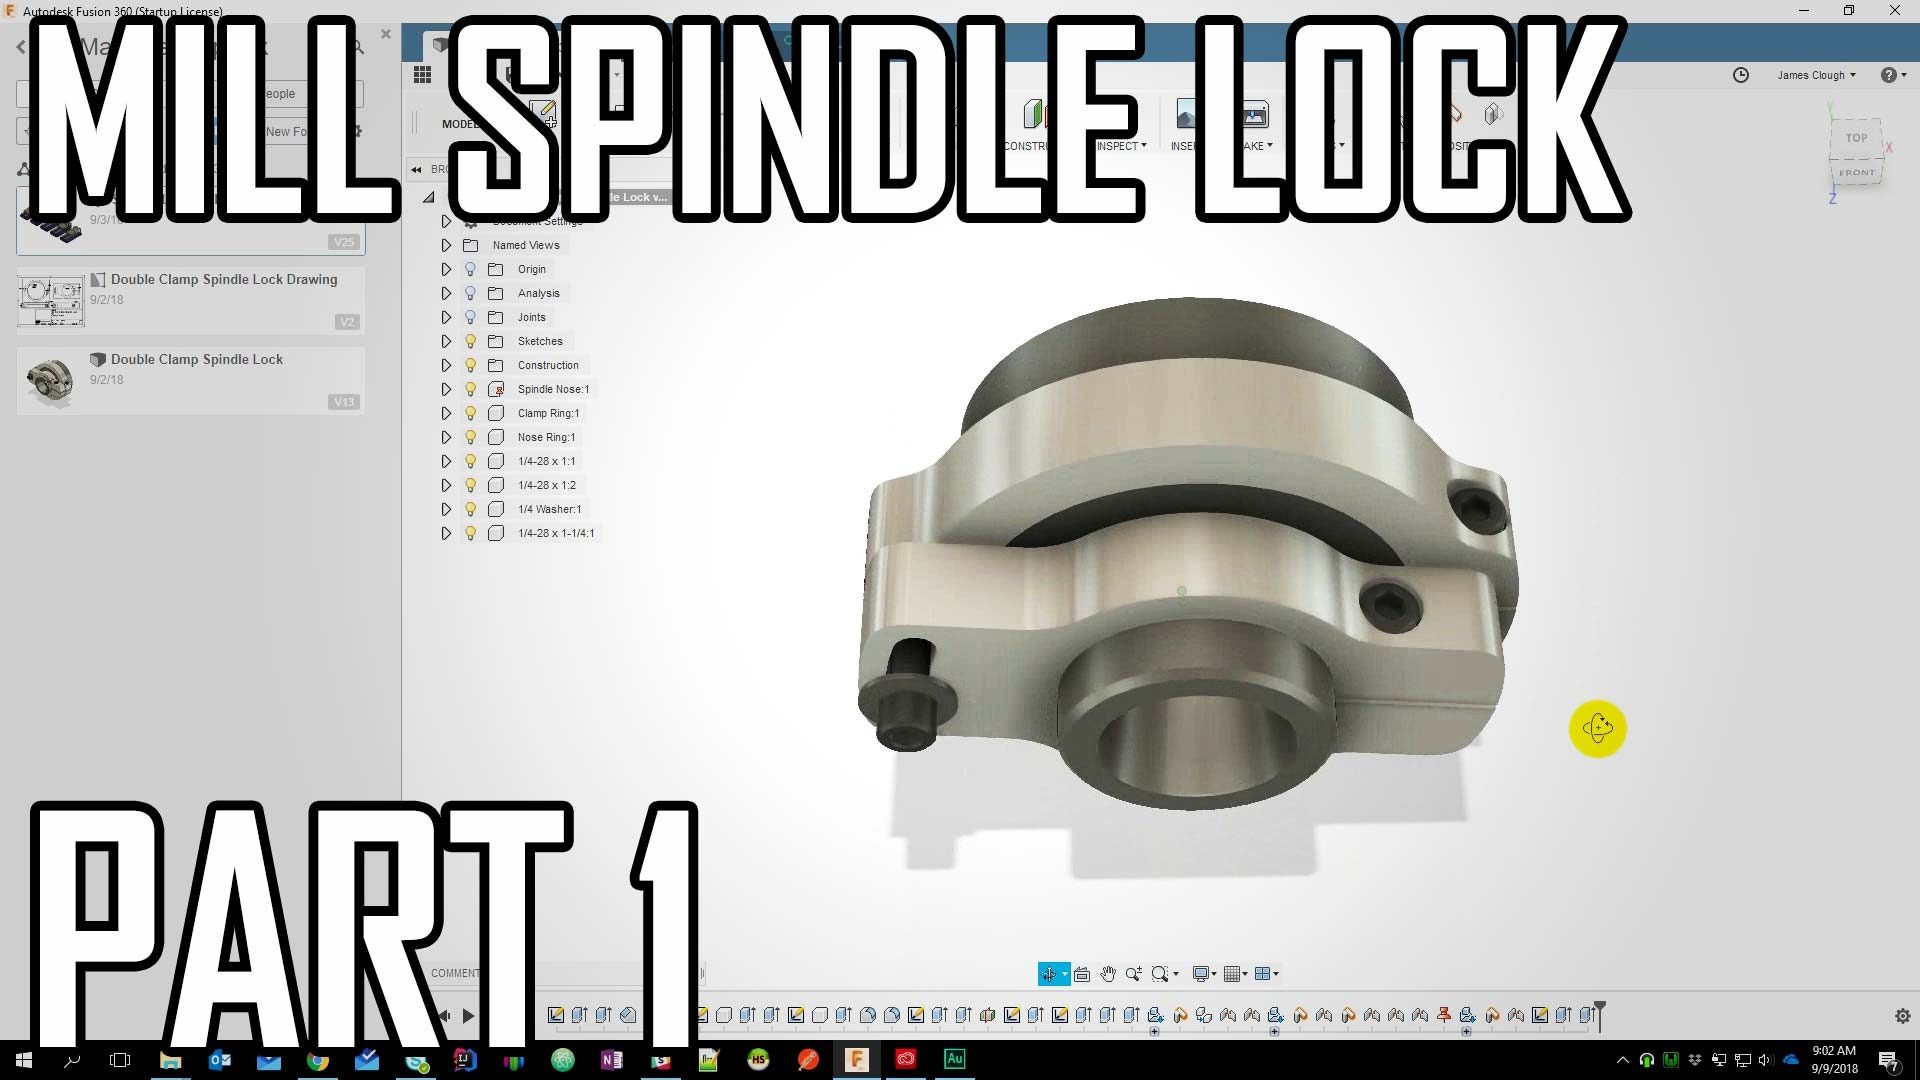 How to Make a Spindle Lock for the Grizzy G0704 Mill: Part 1- Design and CNC Milling